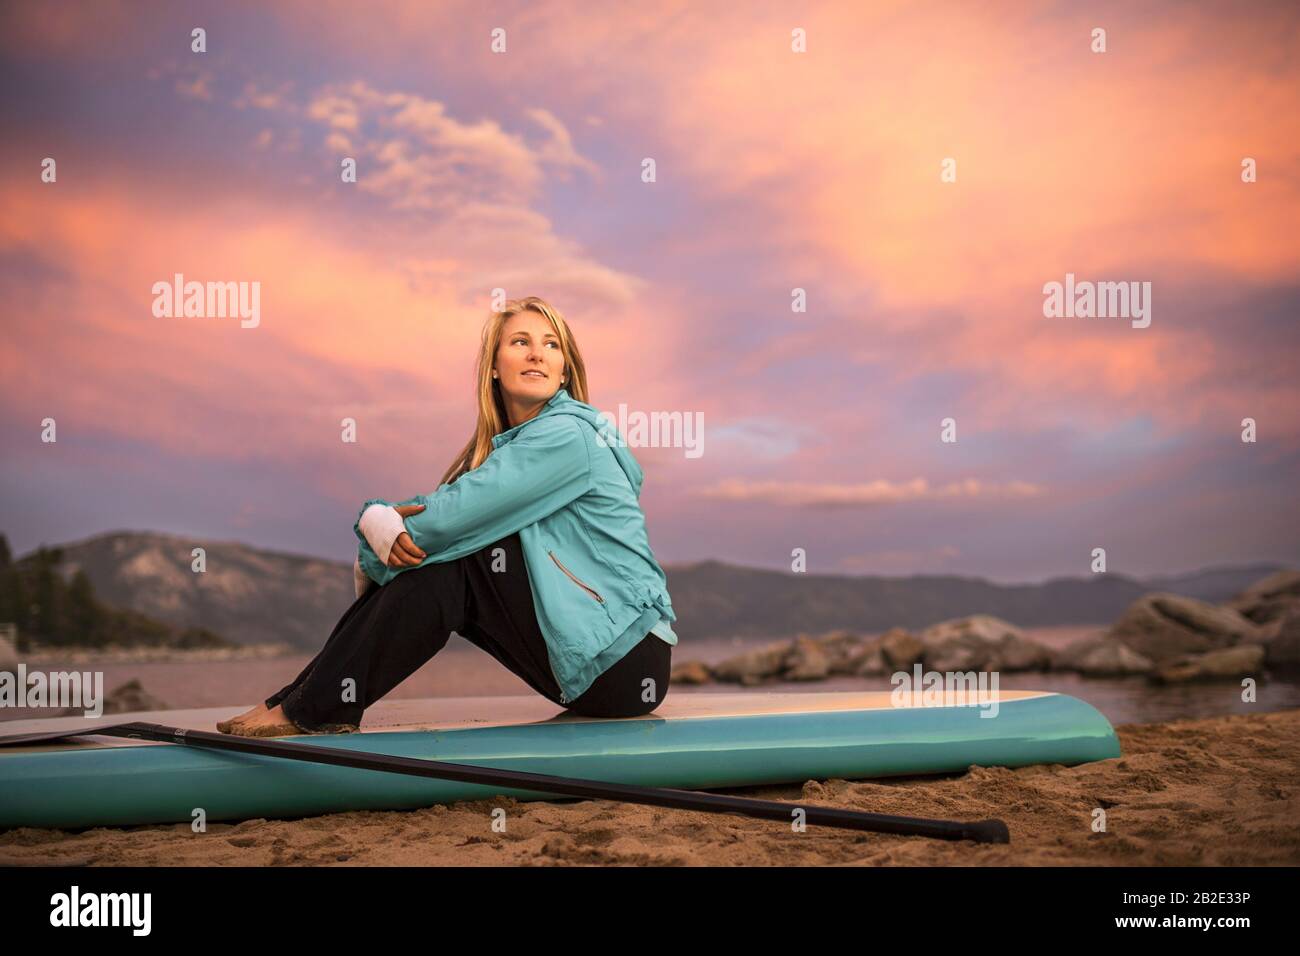 Young woman sitting on her paddle board at the beach Stock Photo